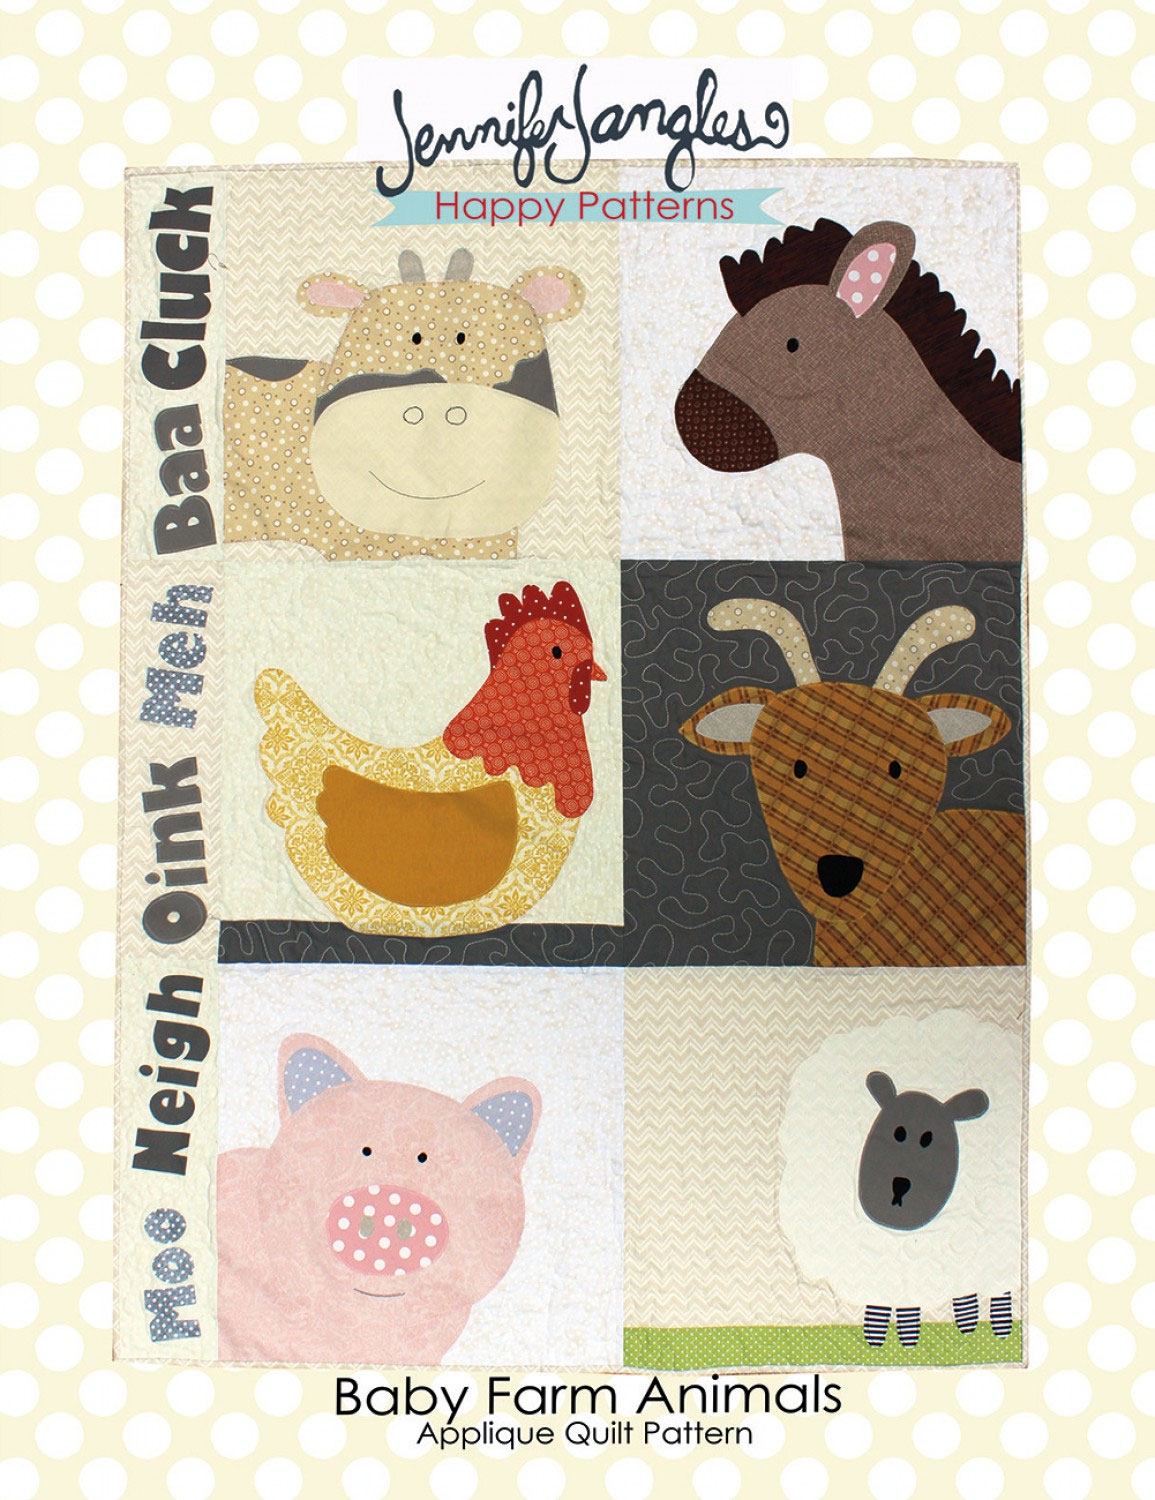 Baby-Farm-Animals-quilt-sewing-pattern-Jennifer-Jangles-front